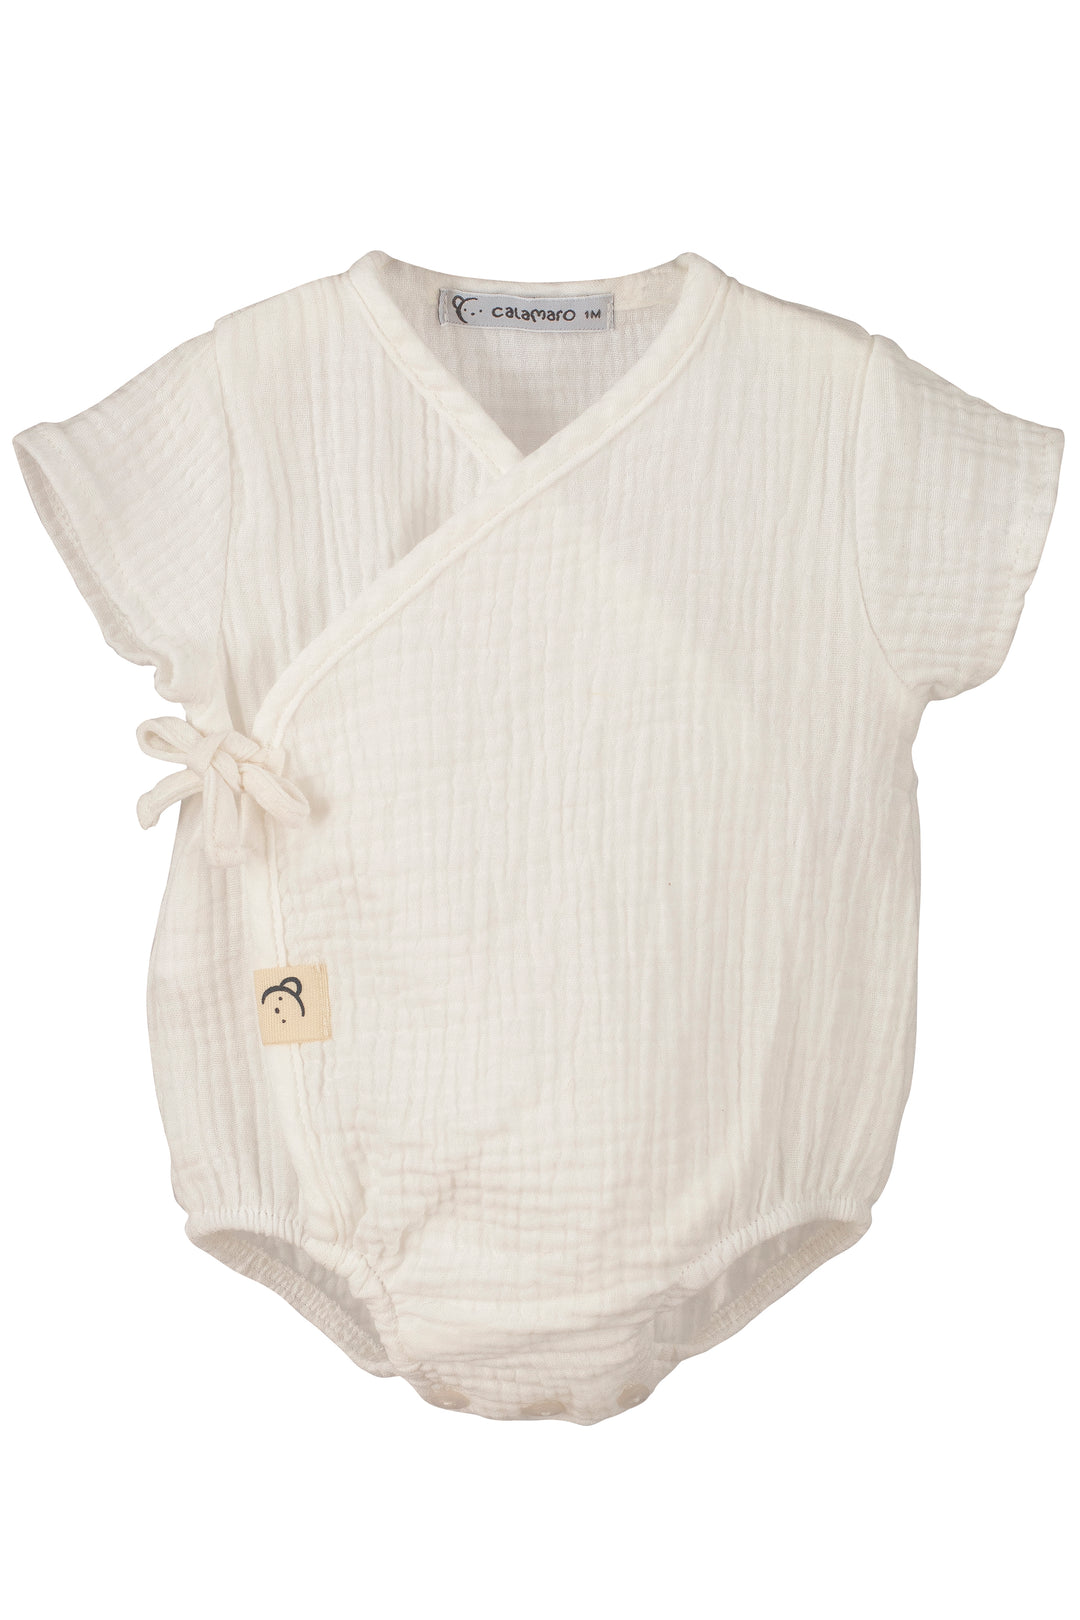 Calamaro PREORDER "Remi" Ivory Cheesecloth Romper | Millie and John